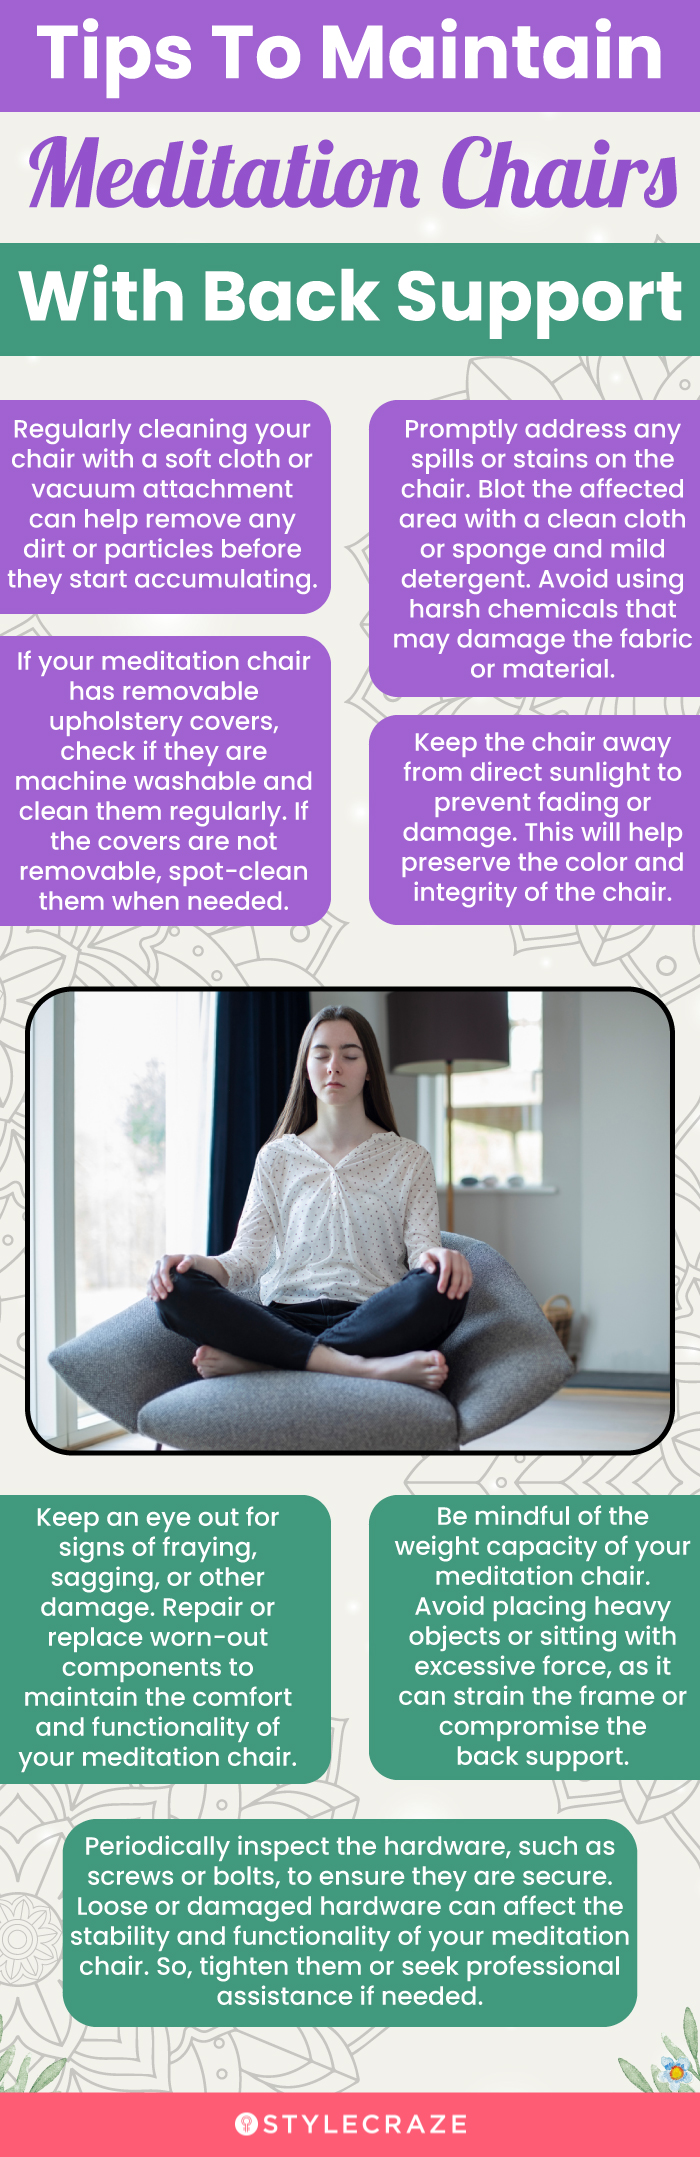 Tips To Maintain Meditation Chairs With Back Support (infographic)